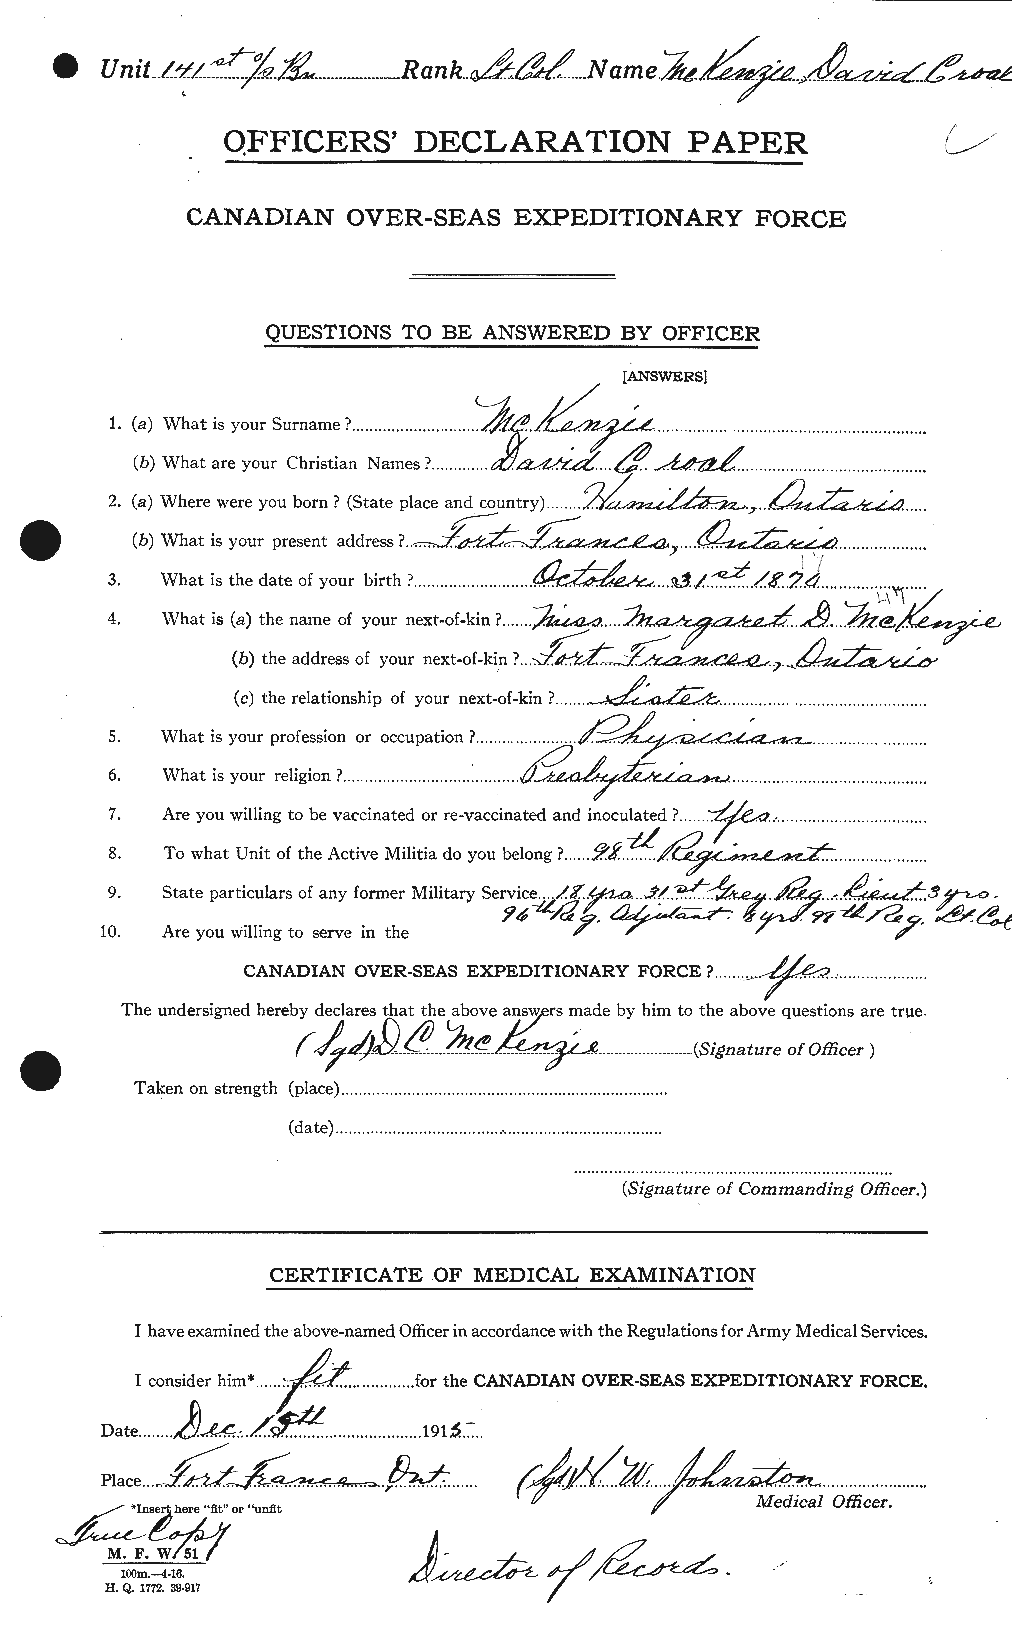 Personnel Records of the First World War - CEF 529027a